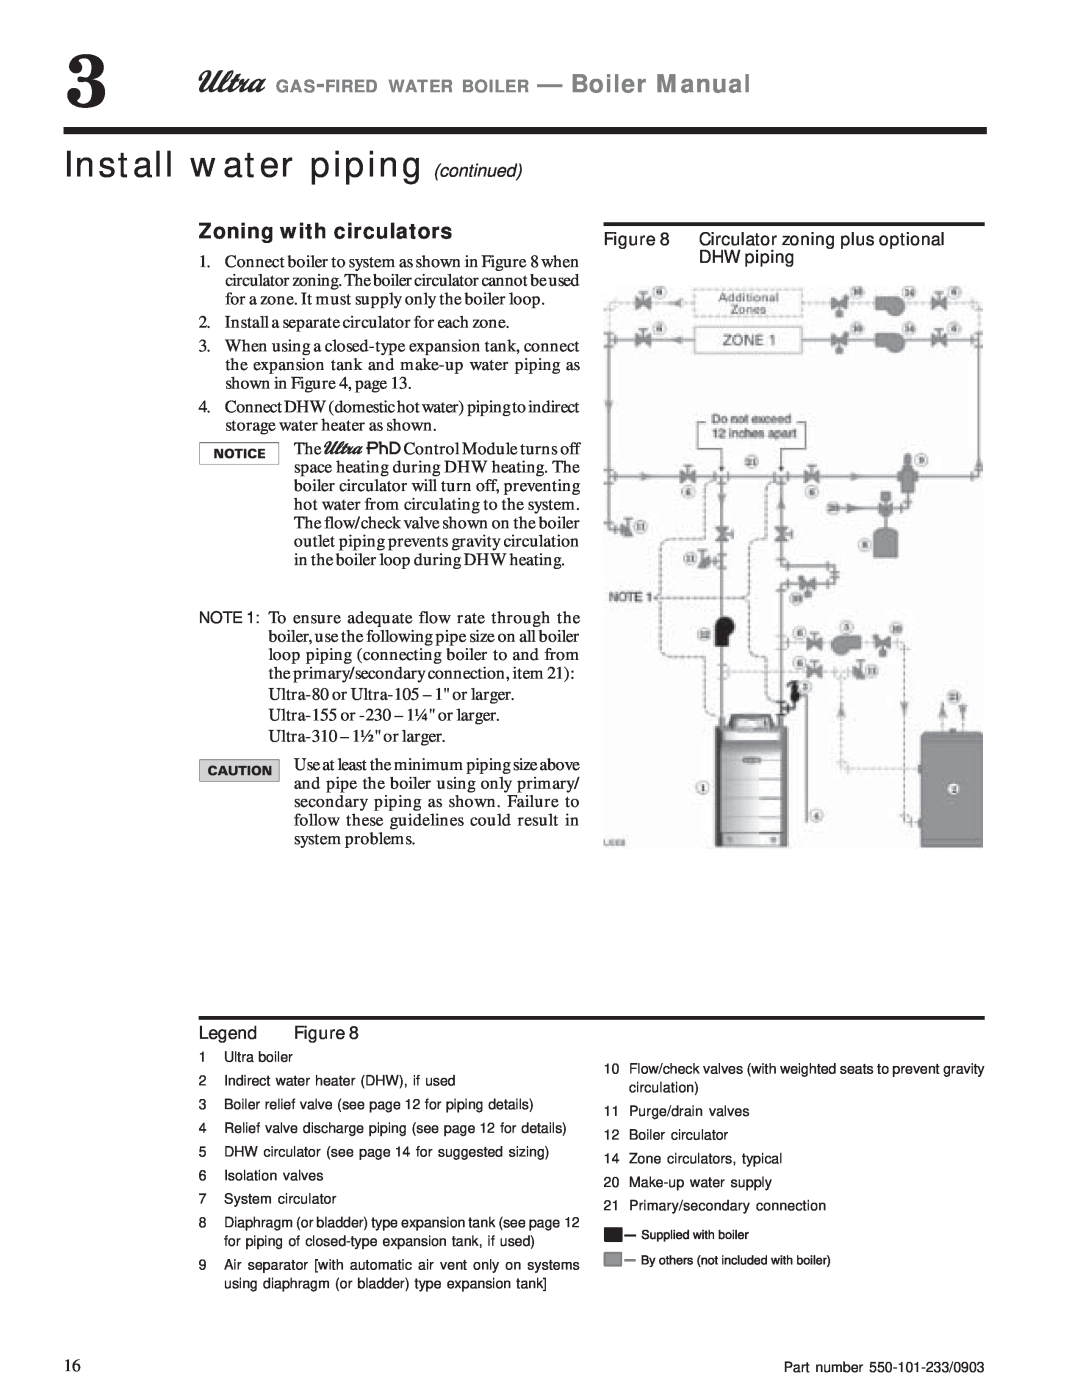 Weil-McLain 230, 80, 310 Install water piping continued, Zoning with circulators, GAS-FIRED WATER BOILER - Boiler Manual 